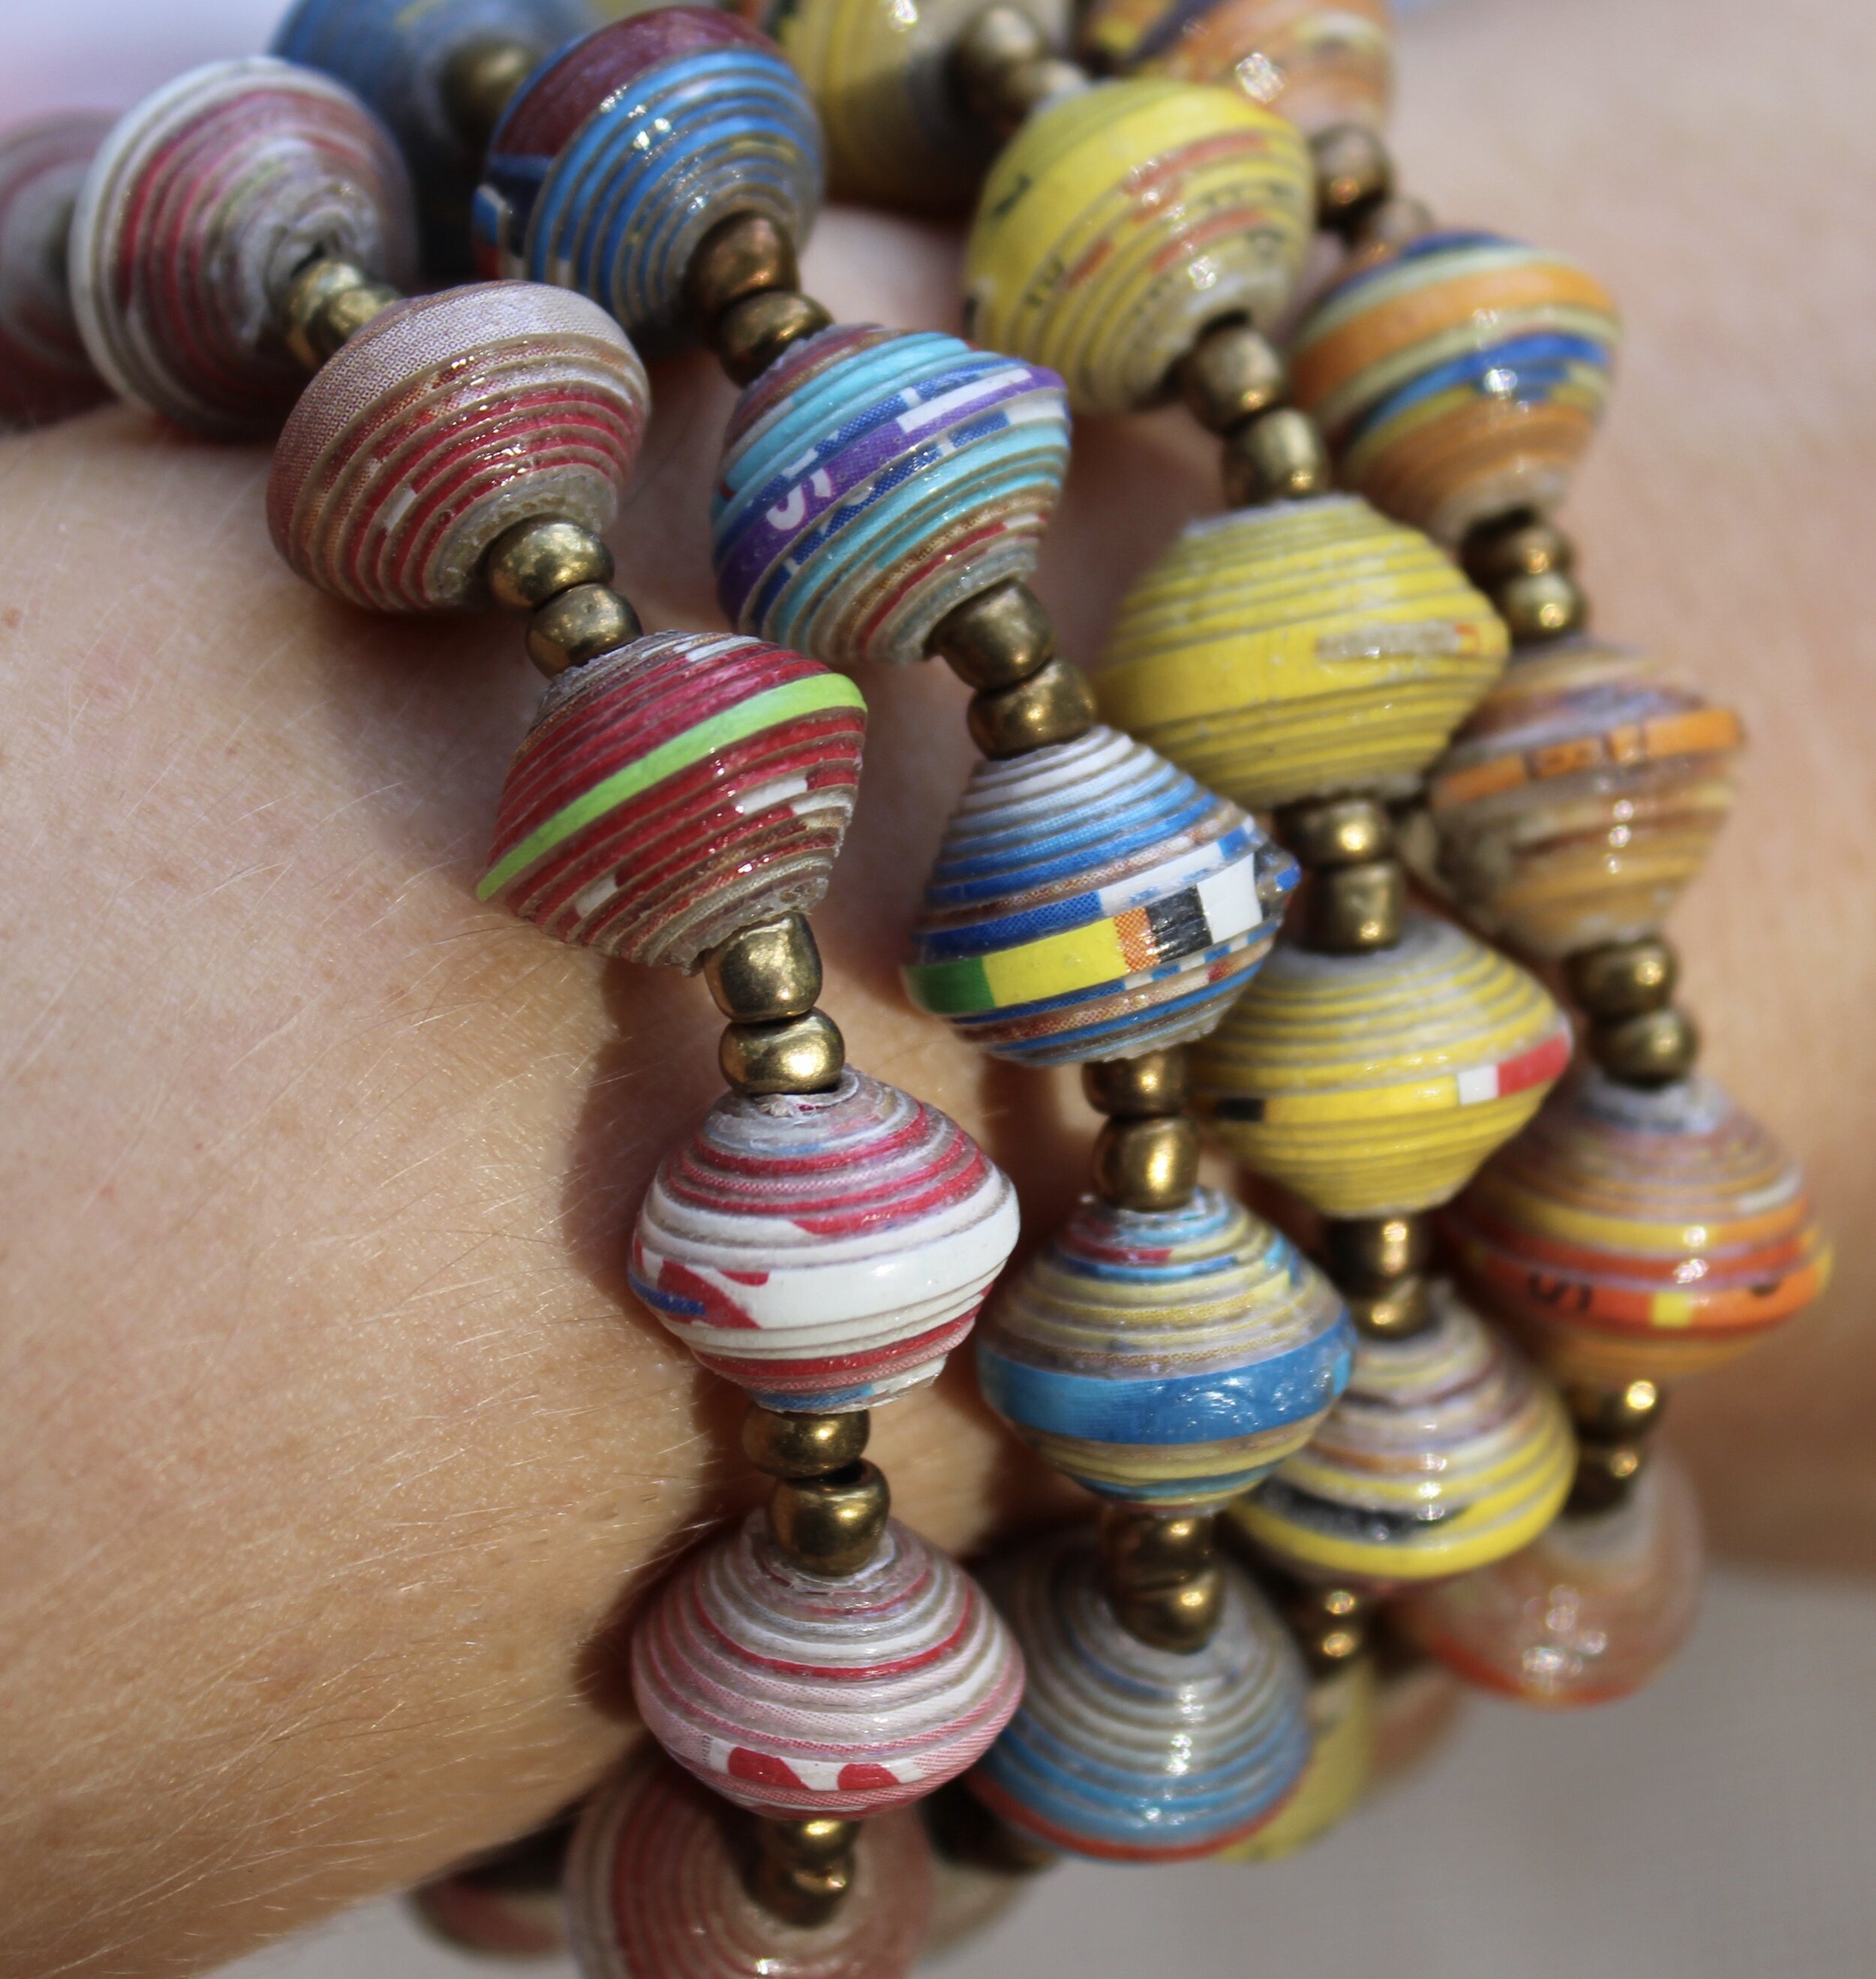 Buy Paper Beads Bracelet Paper Bead Jewelry Recycled Paper Online in India   Etsy